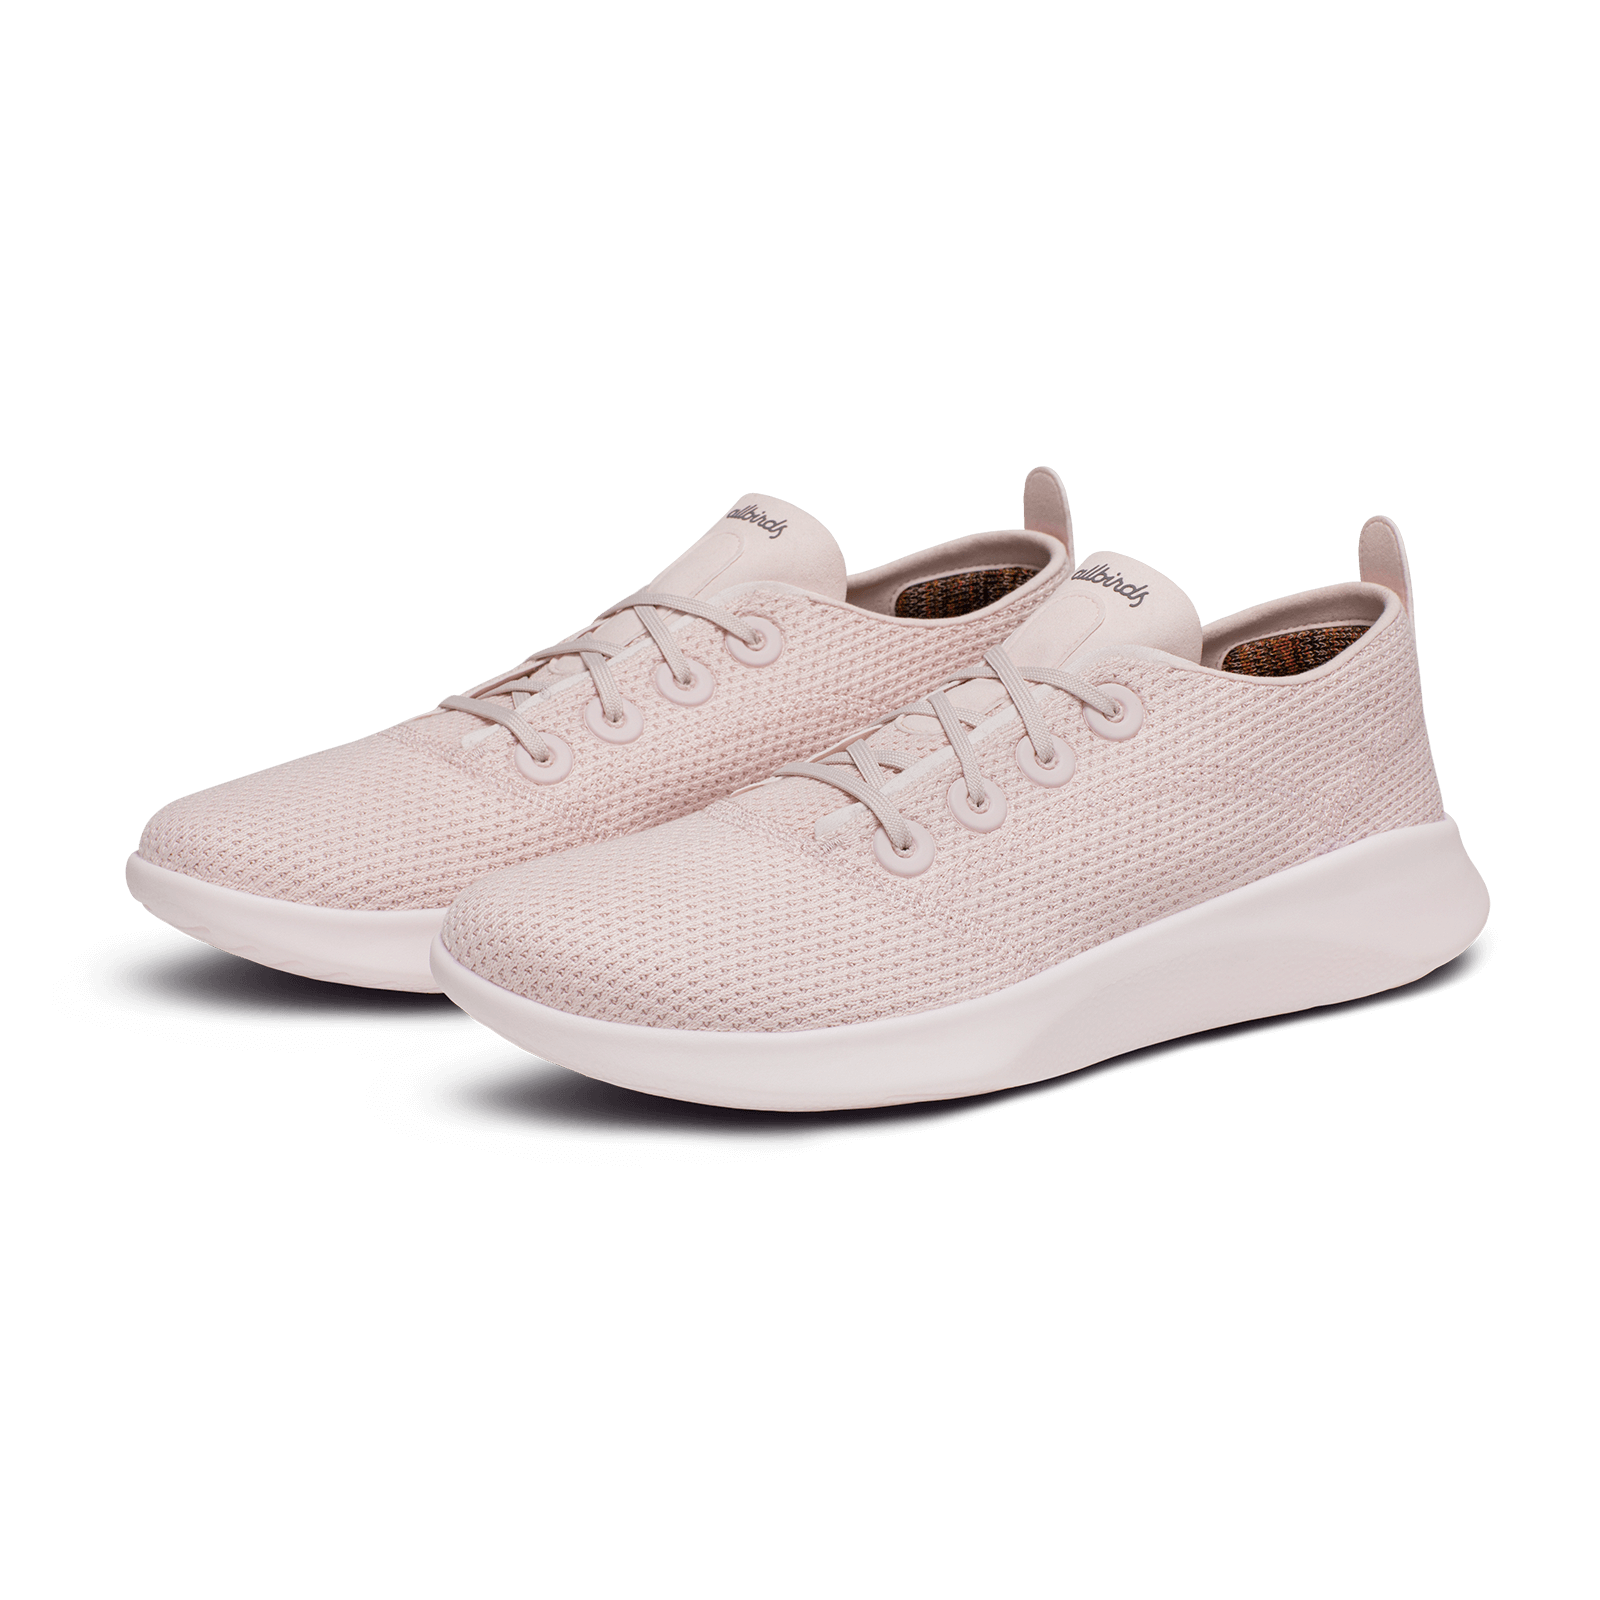 Women's SuperLight Tree Runners - Calm Taupe (Calm Taupe Sole)